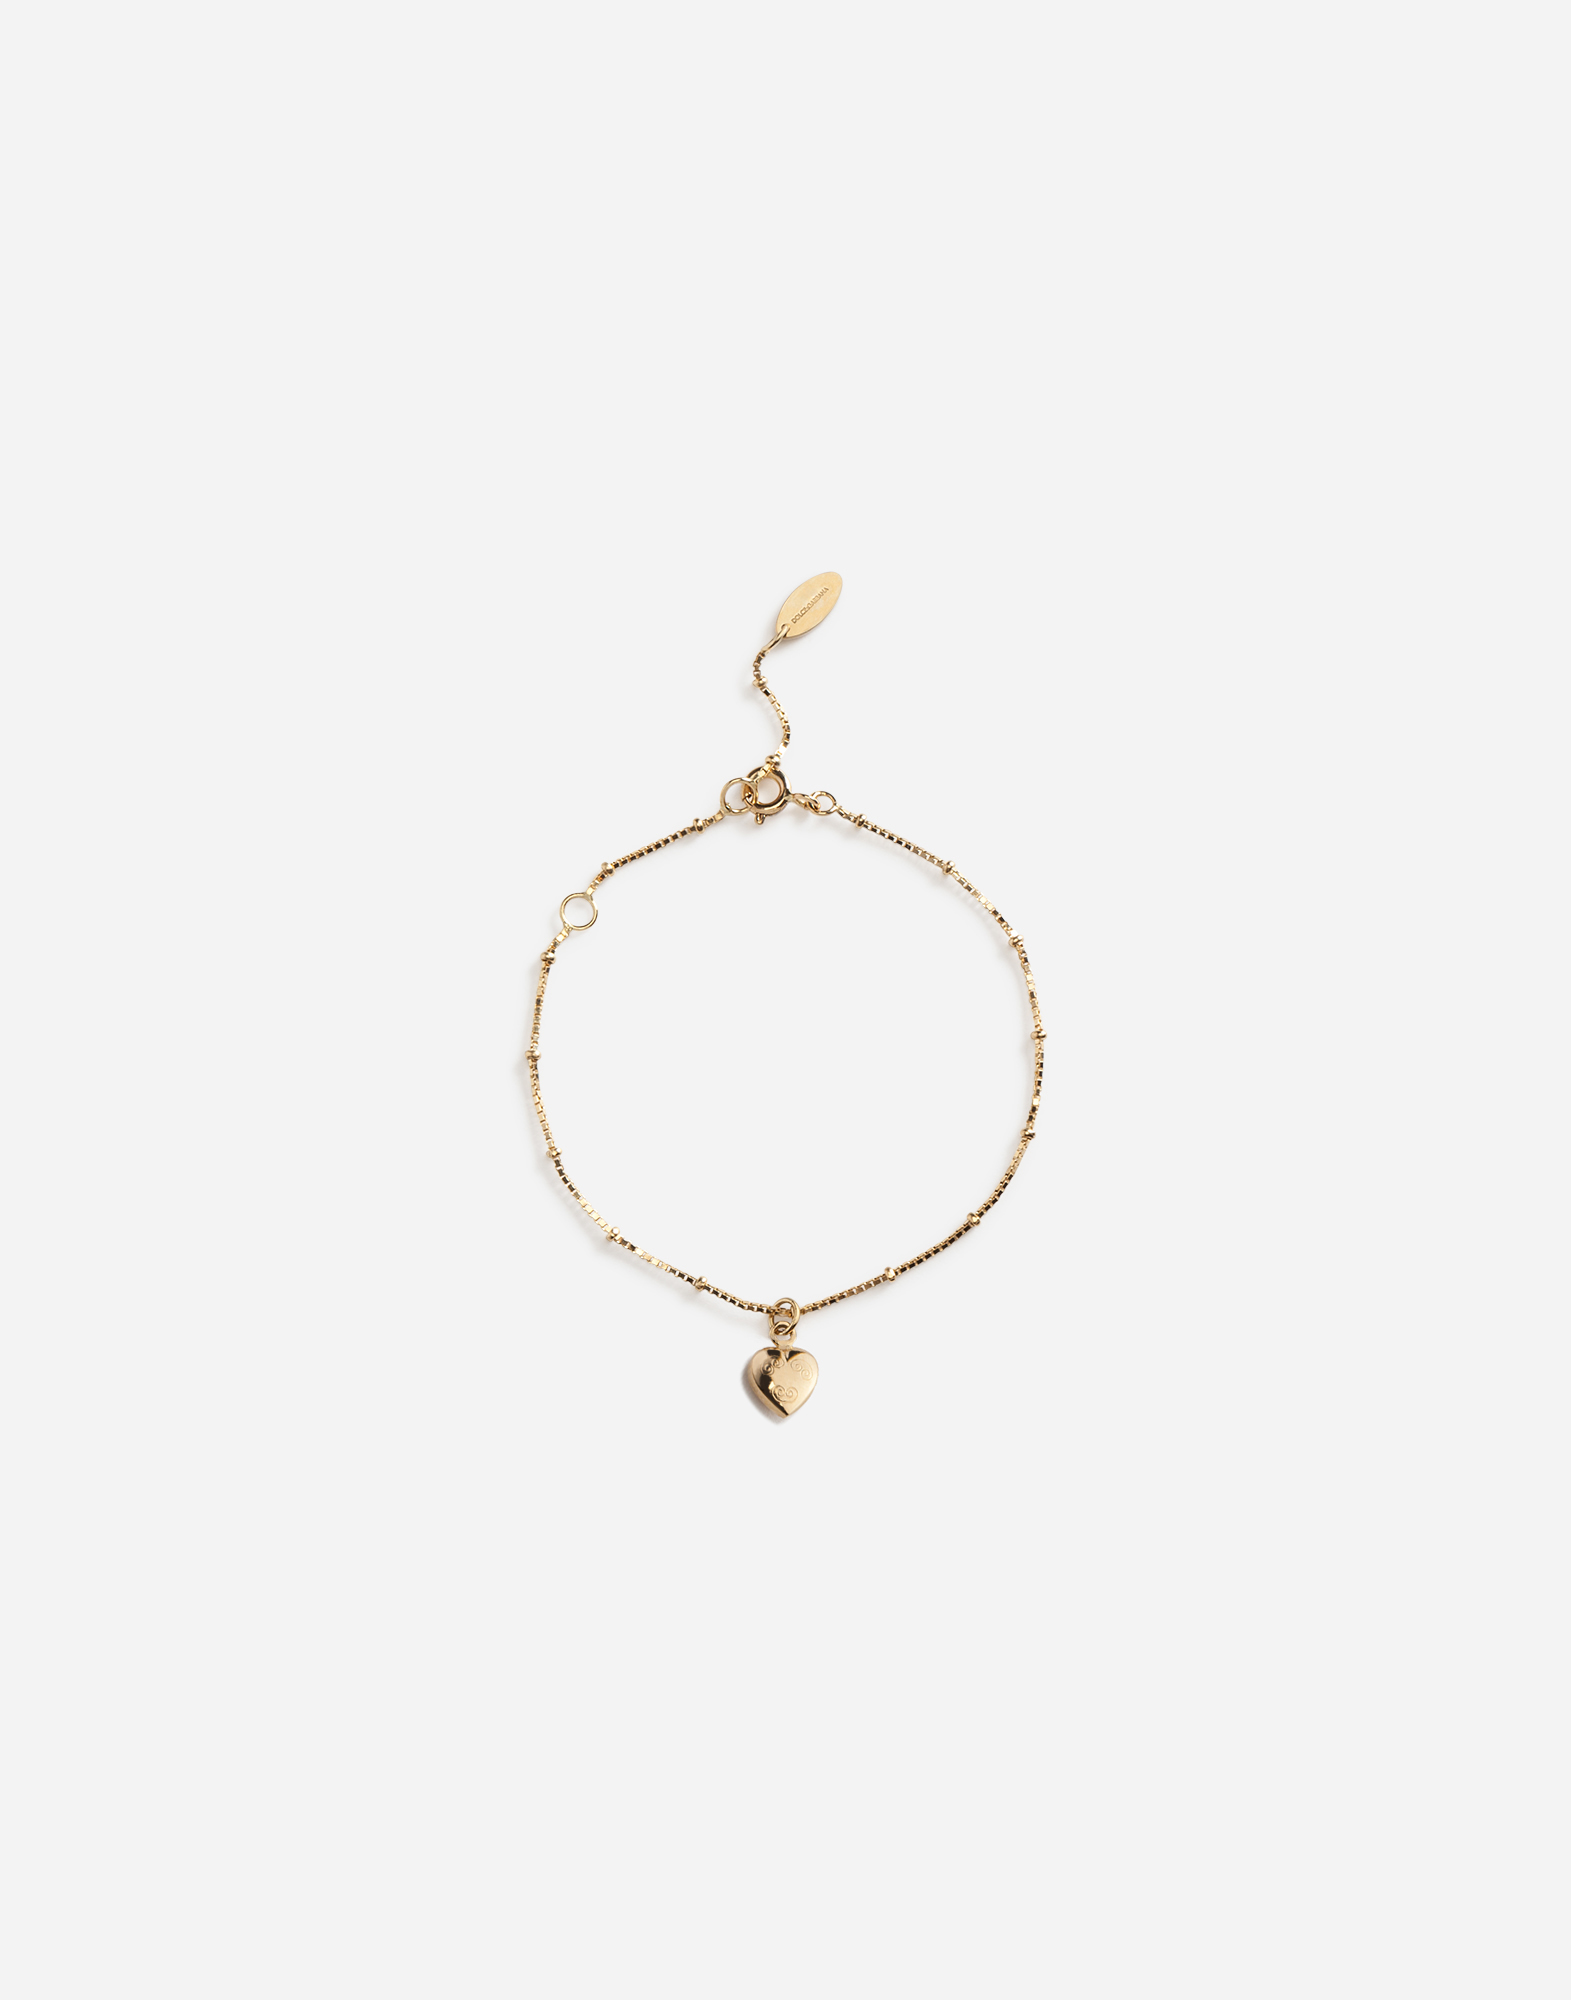 Bracelet with heart charm in Yellow Gold